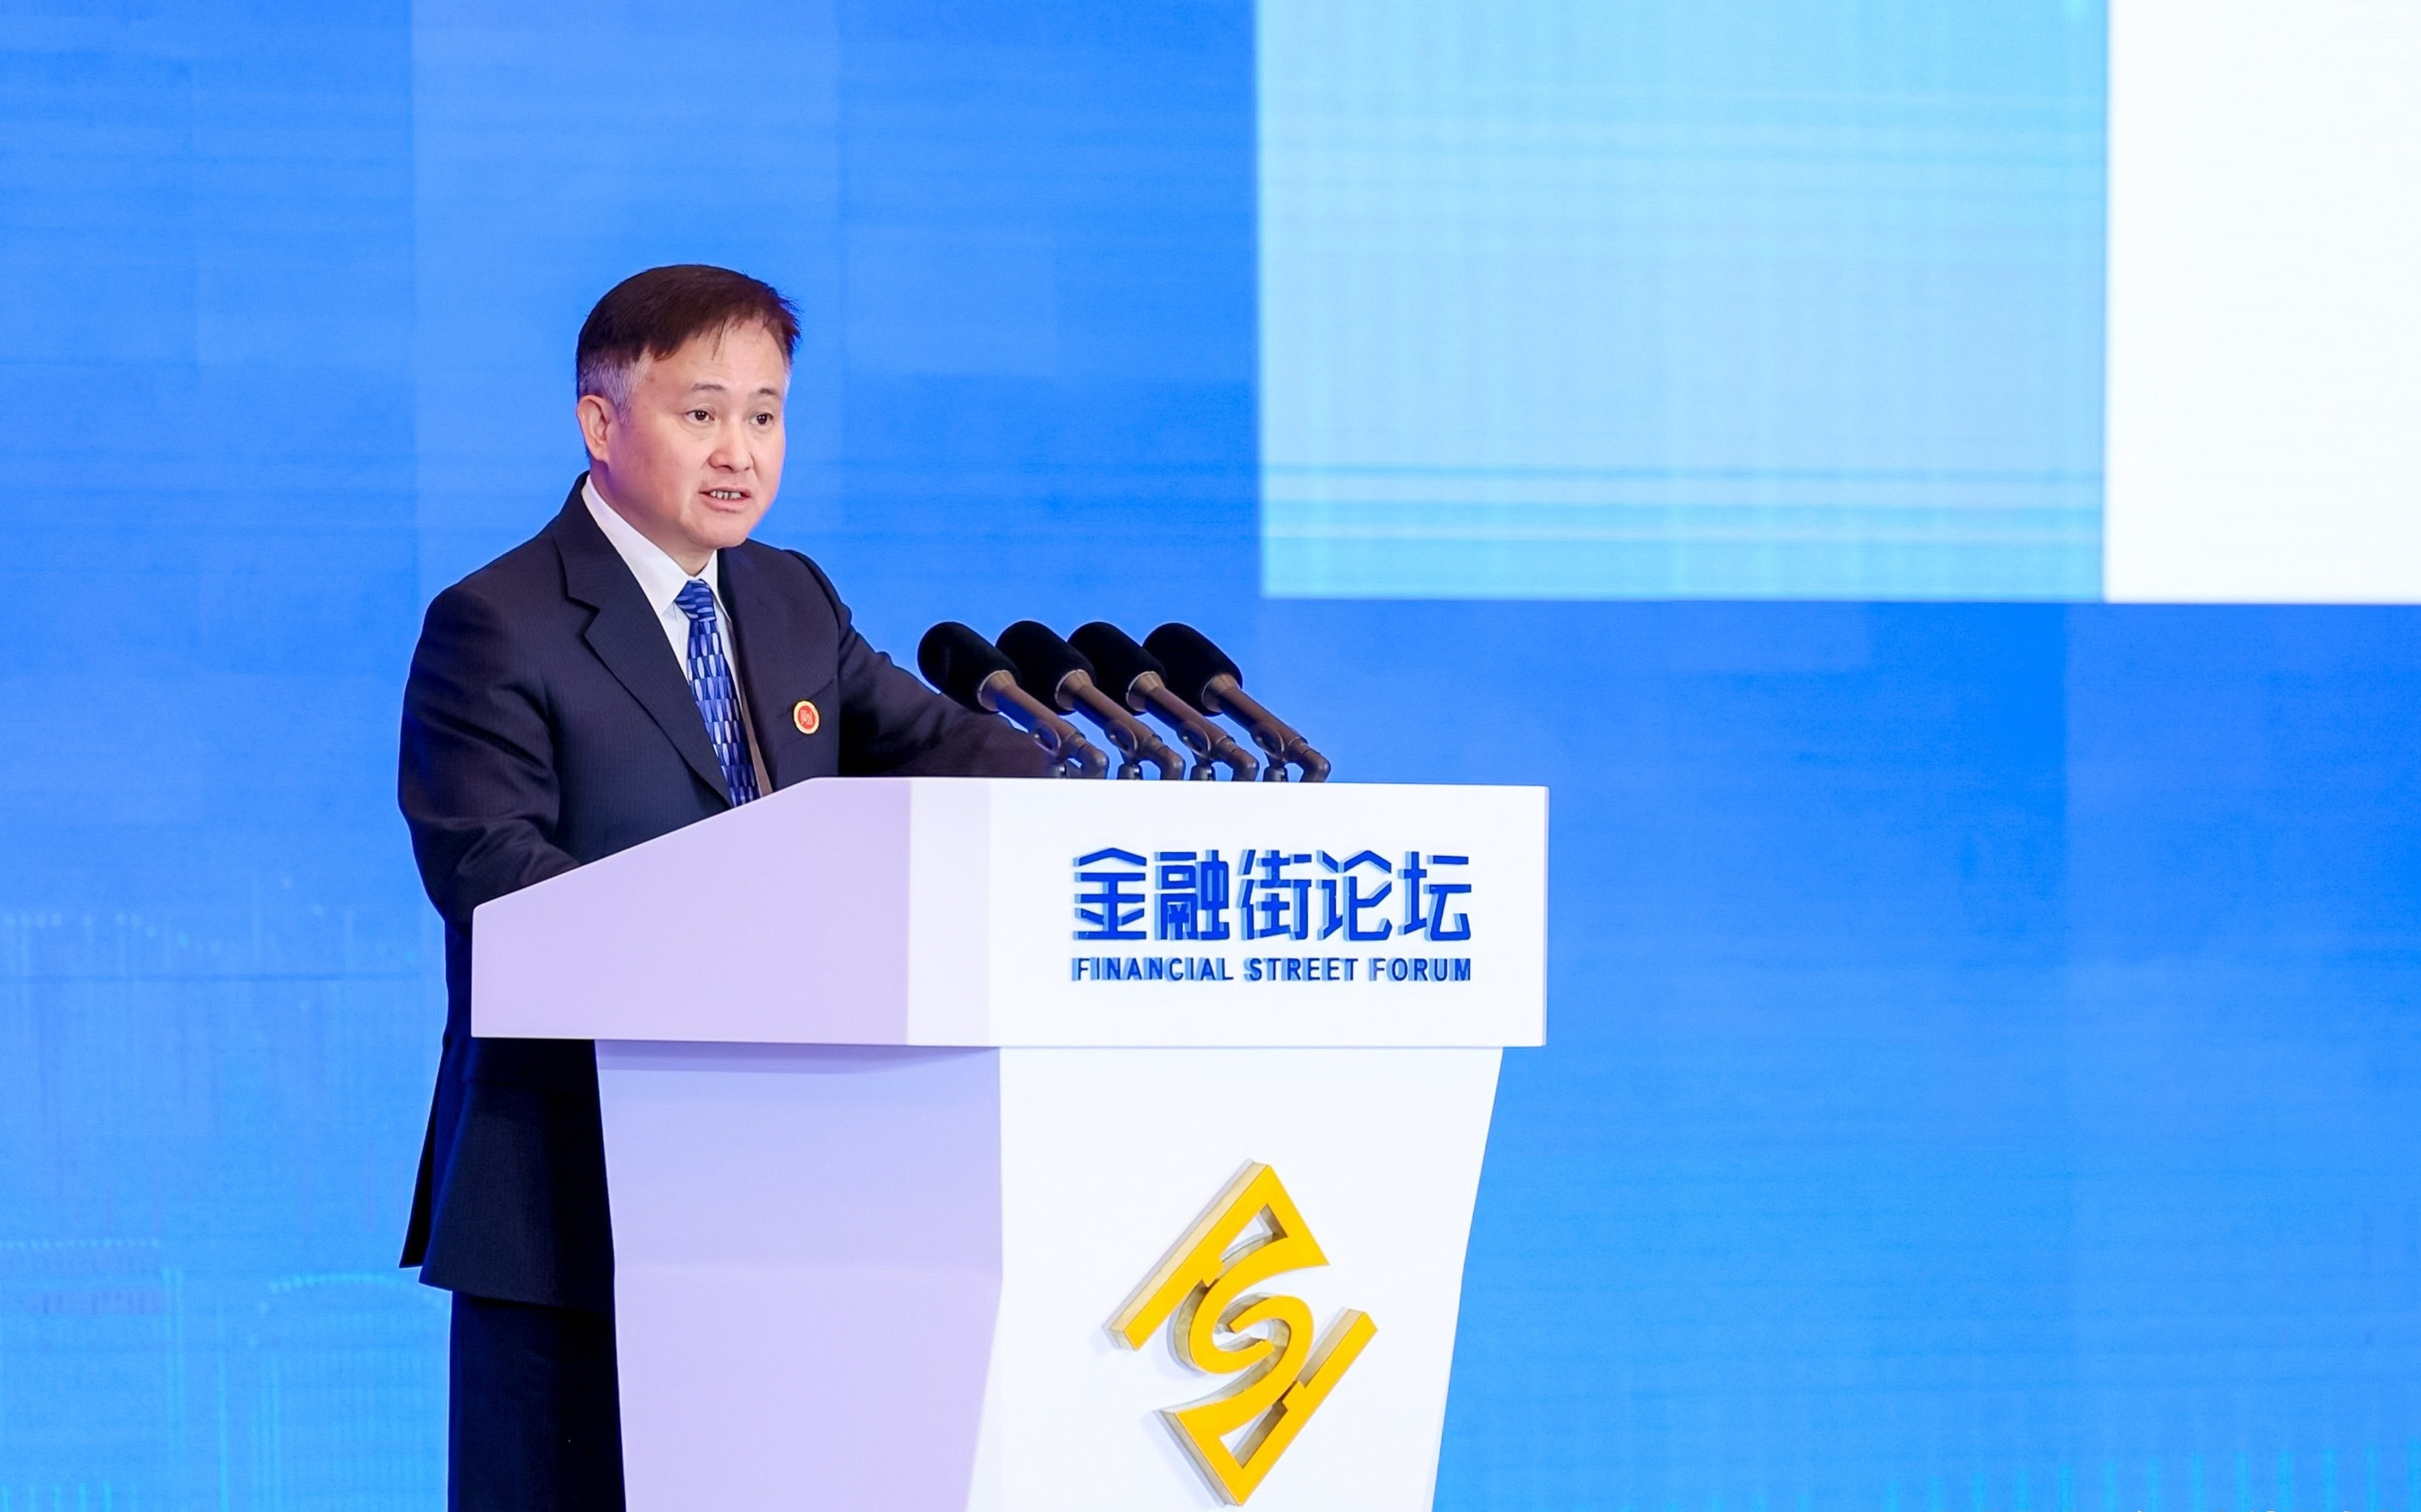 People’s Bank of China (PBOC) governor Pan Gongsheng addressing the opening ceremony of the Financial Street Forum 2023 in Beijing. Photo: Financial Street Forum 2023